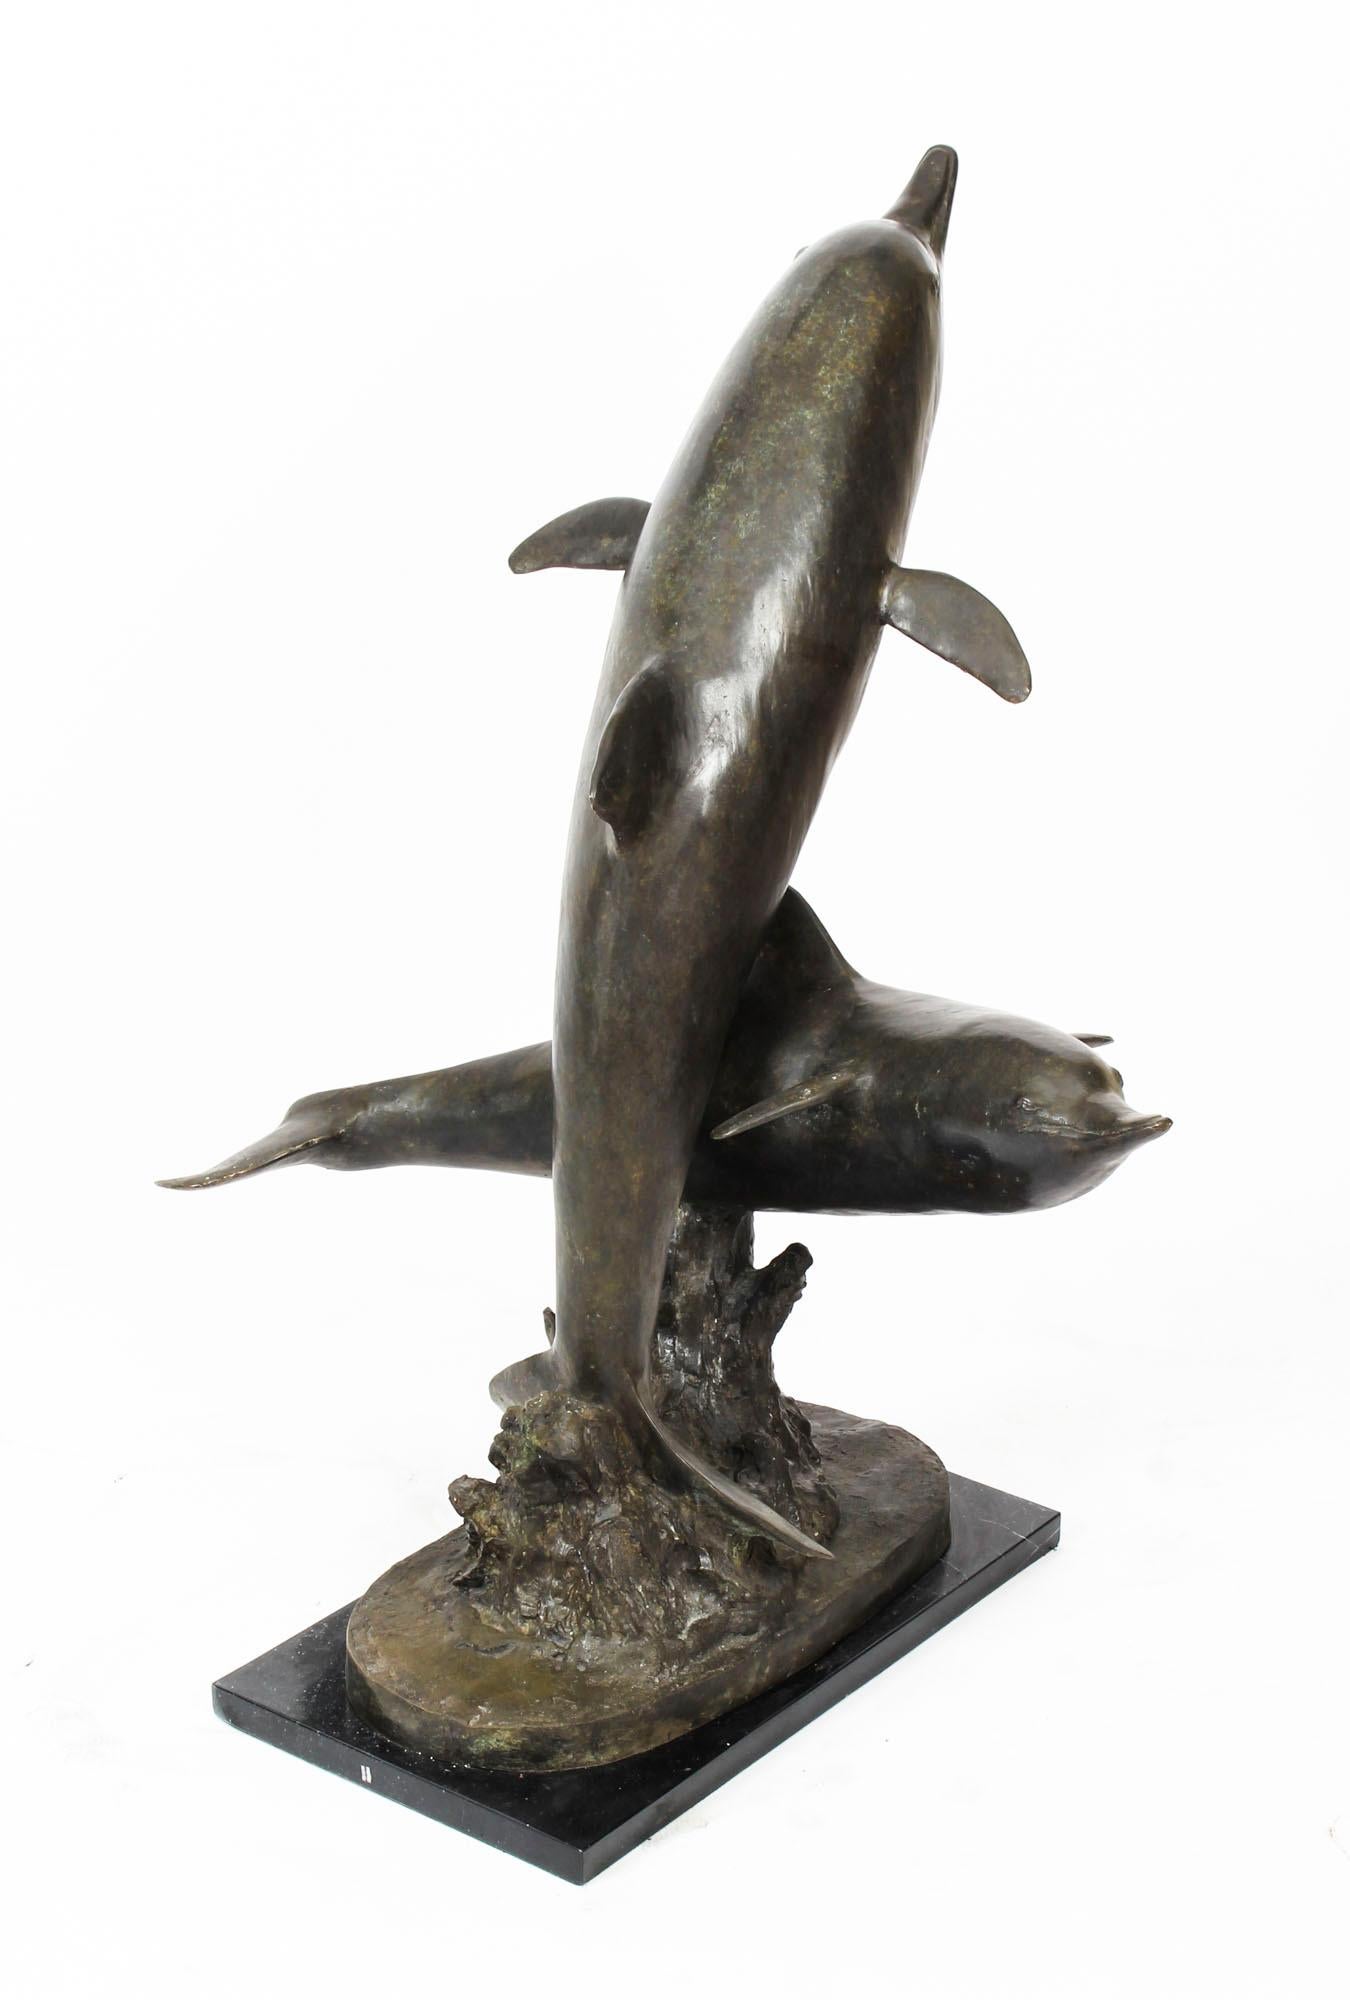 This is a gorgeous vintage bronze statue of two charming dolphins, dating from the last quarter of the 20th century.
 
This life-like bronze statue features two dolphins riding a wave, placed perpendicular to each other and with their delightful